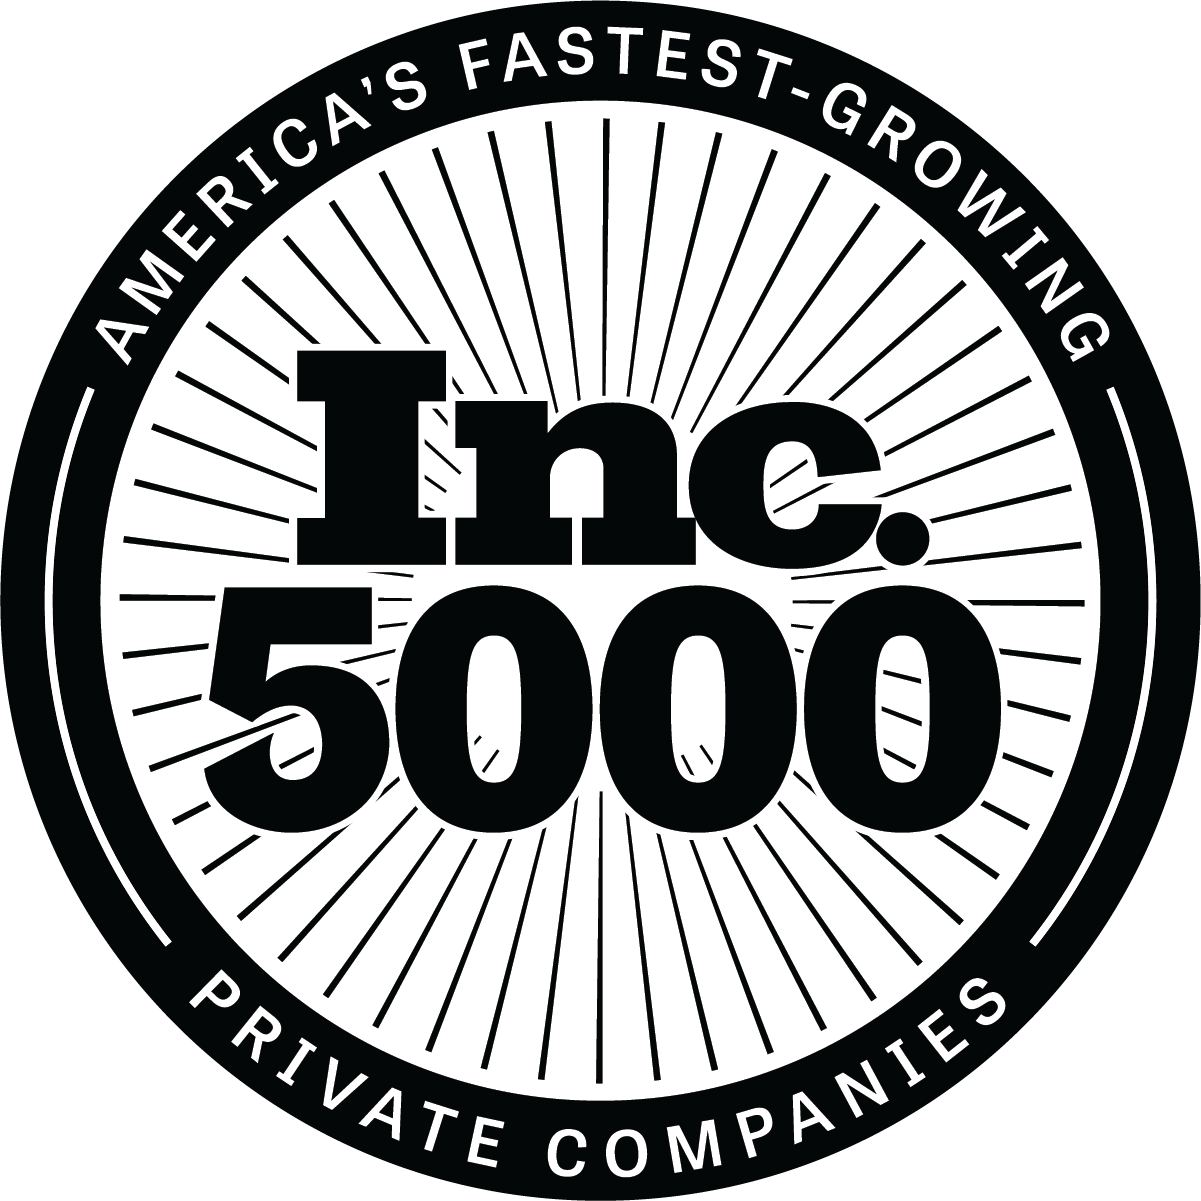 Inc. Magazine Reveals Payrix on Annual List of
America’s Fastest-Growing Private Companies—the Inc. 5000
